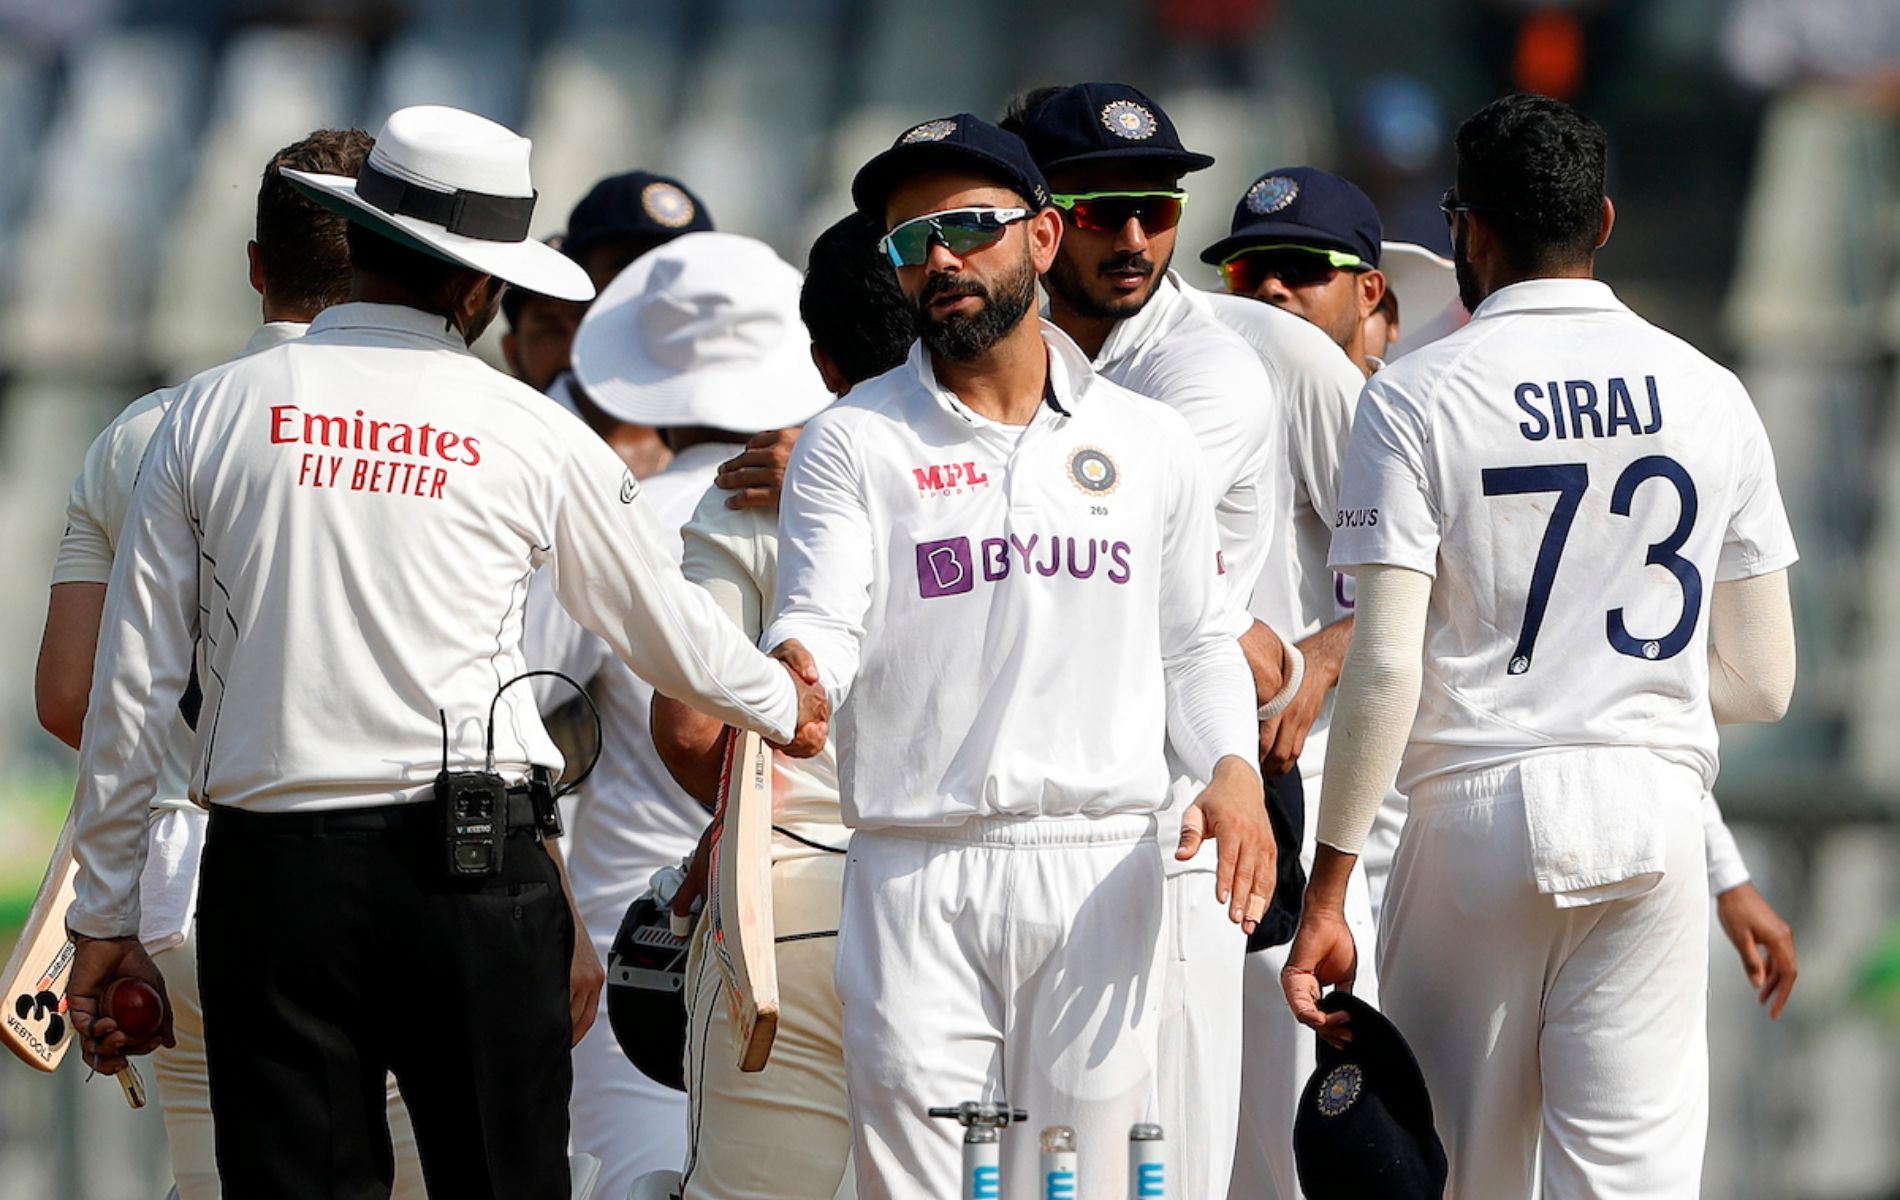 Virat Kohli led India to victory in the second Test against New Zealand.